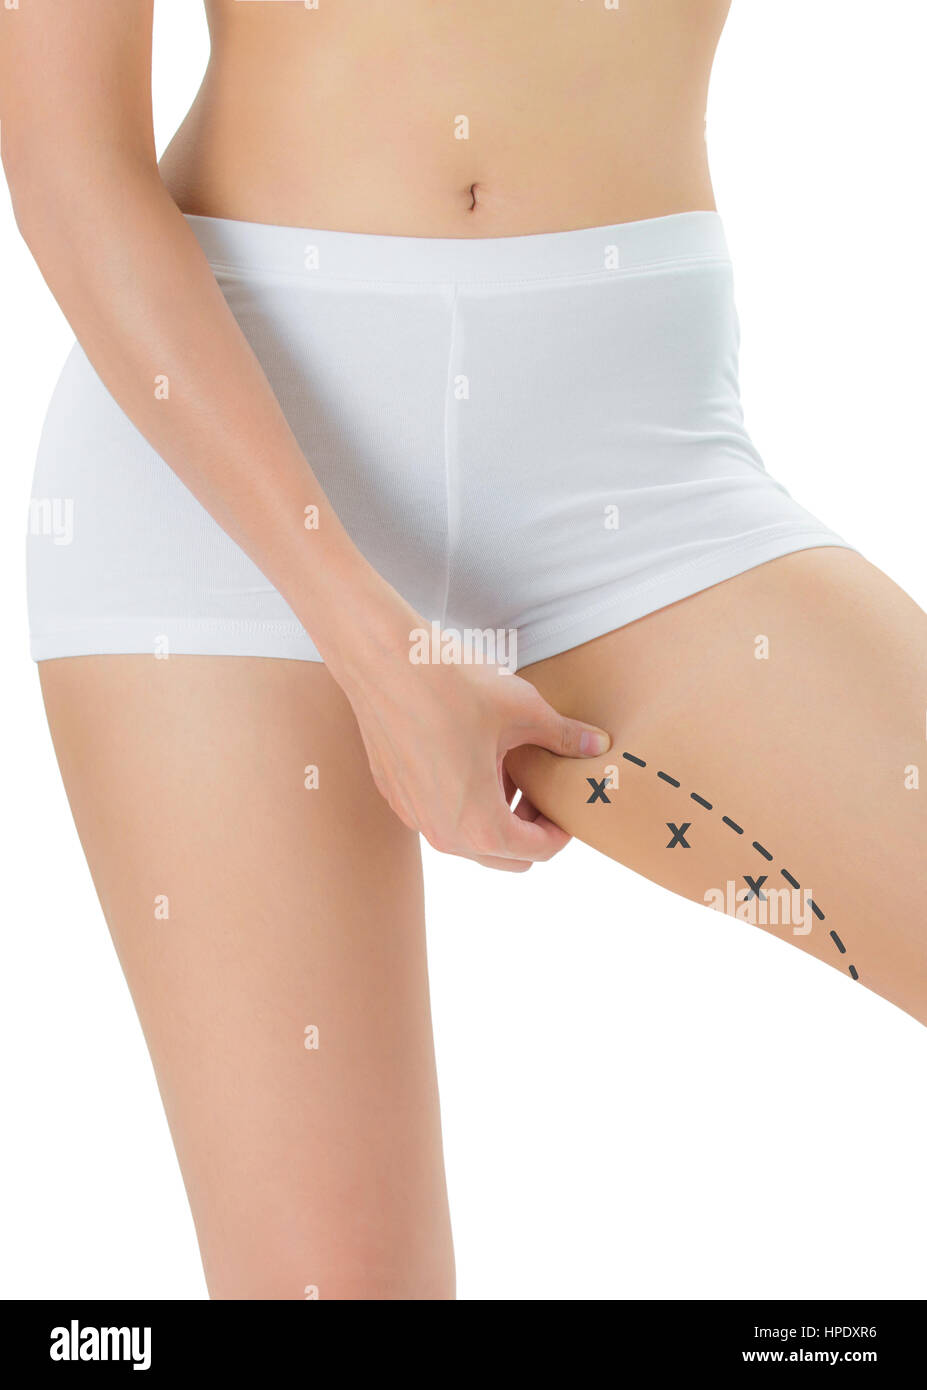 Woman grabbing skin on her Inner thigh with the black color crosses marking, Lose weight and liposuction cellulite removal concept, Isolated on white  Stock Photo